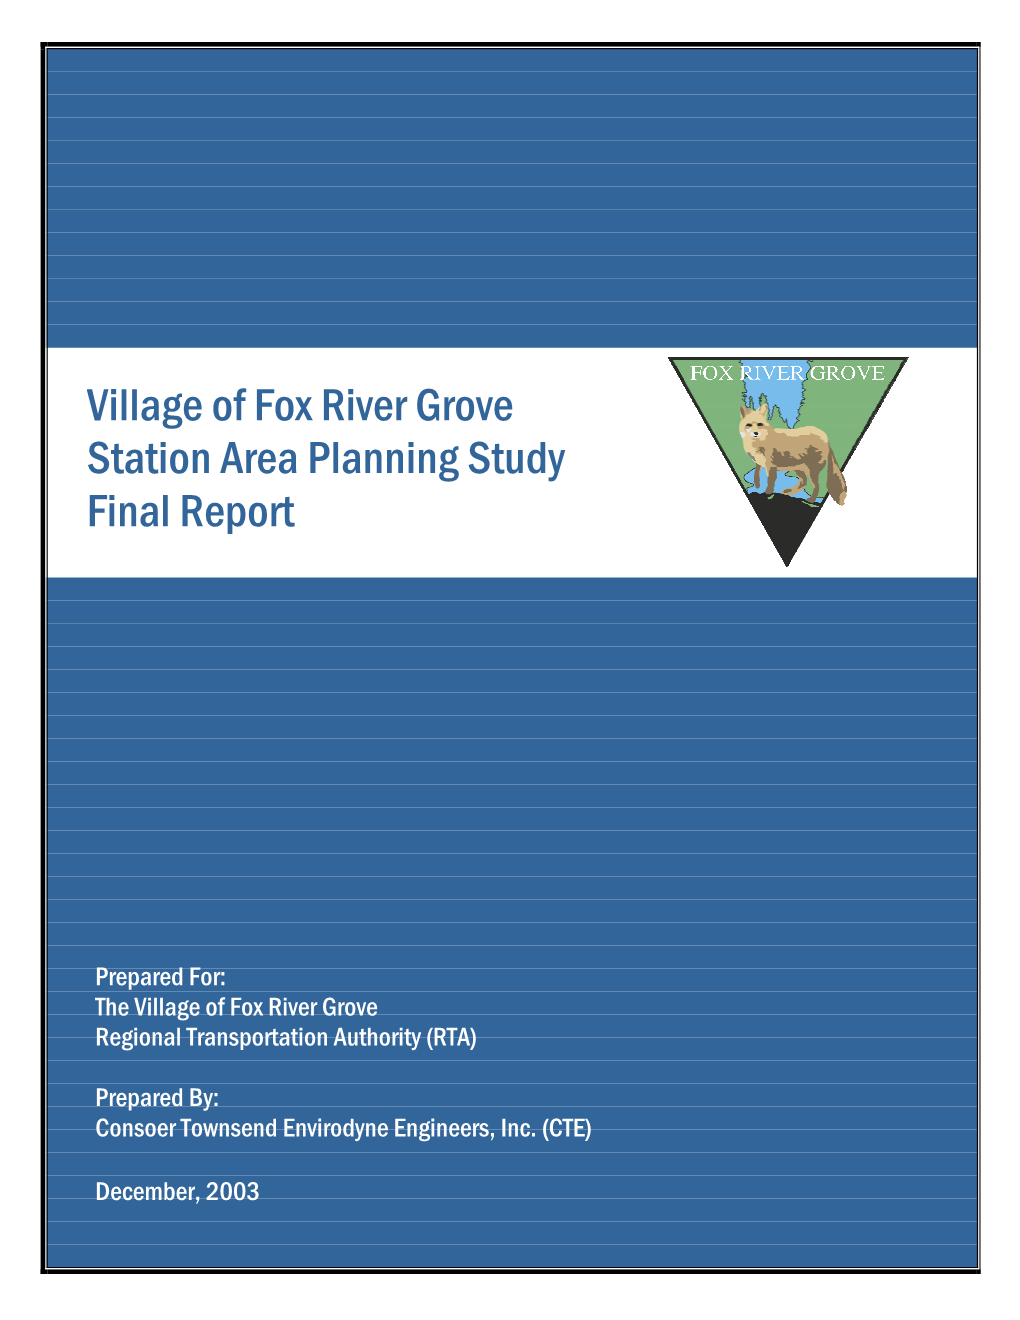 Village of Fox River Grove Station Area Planning Study Final Report